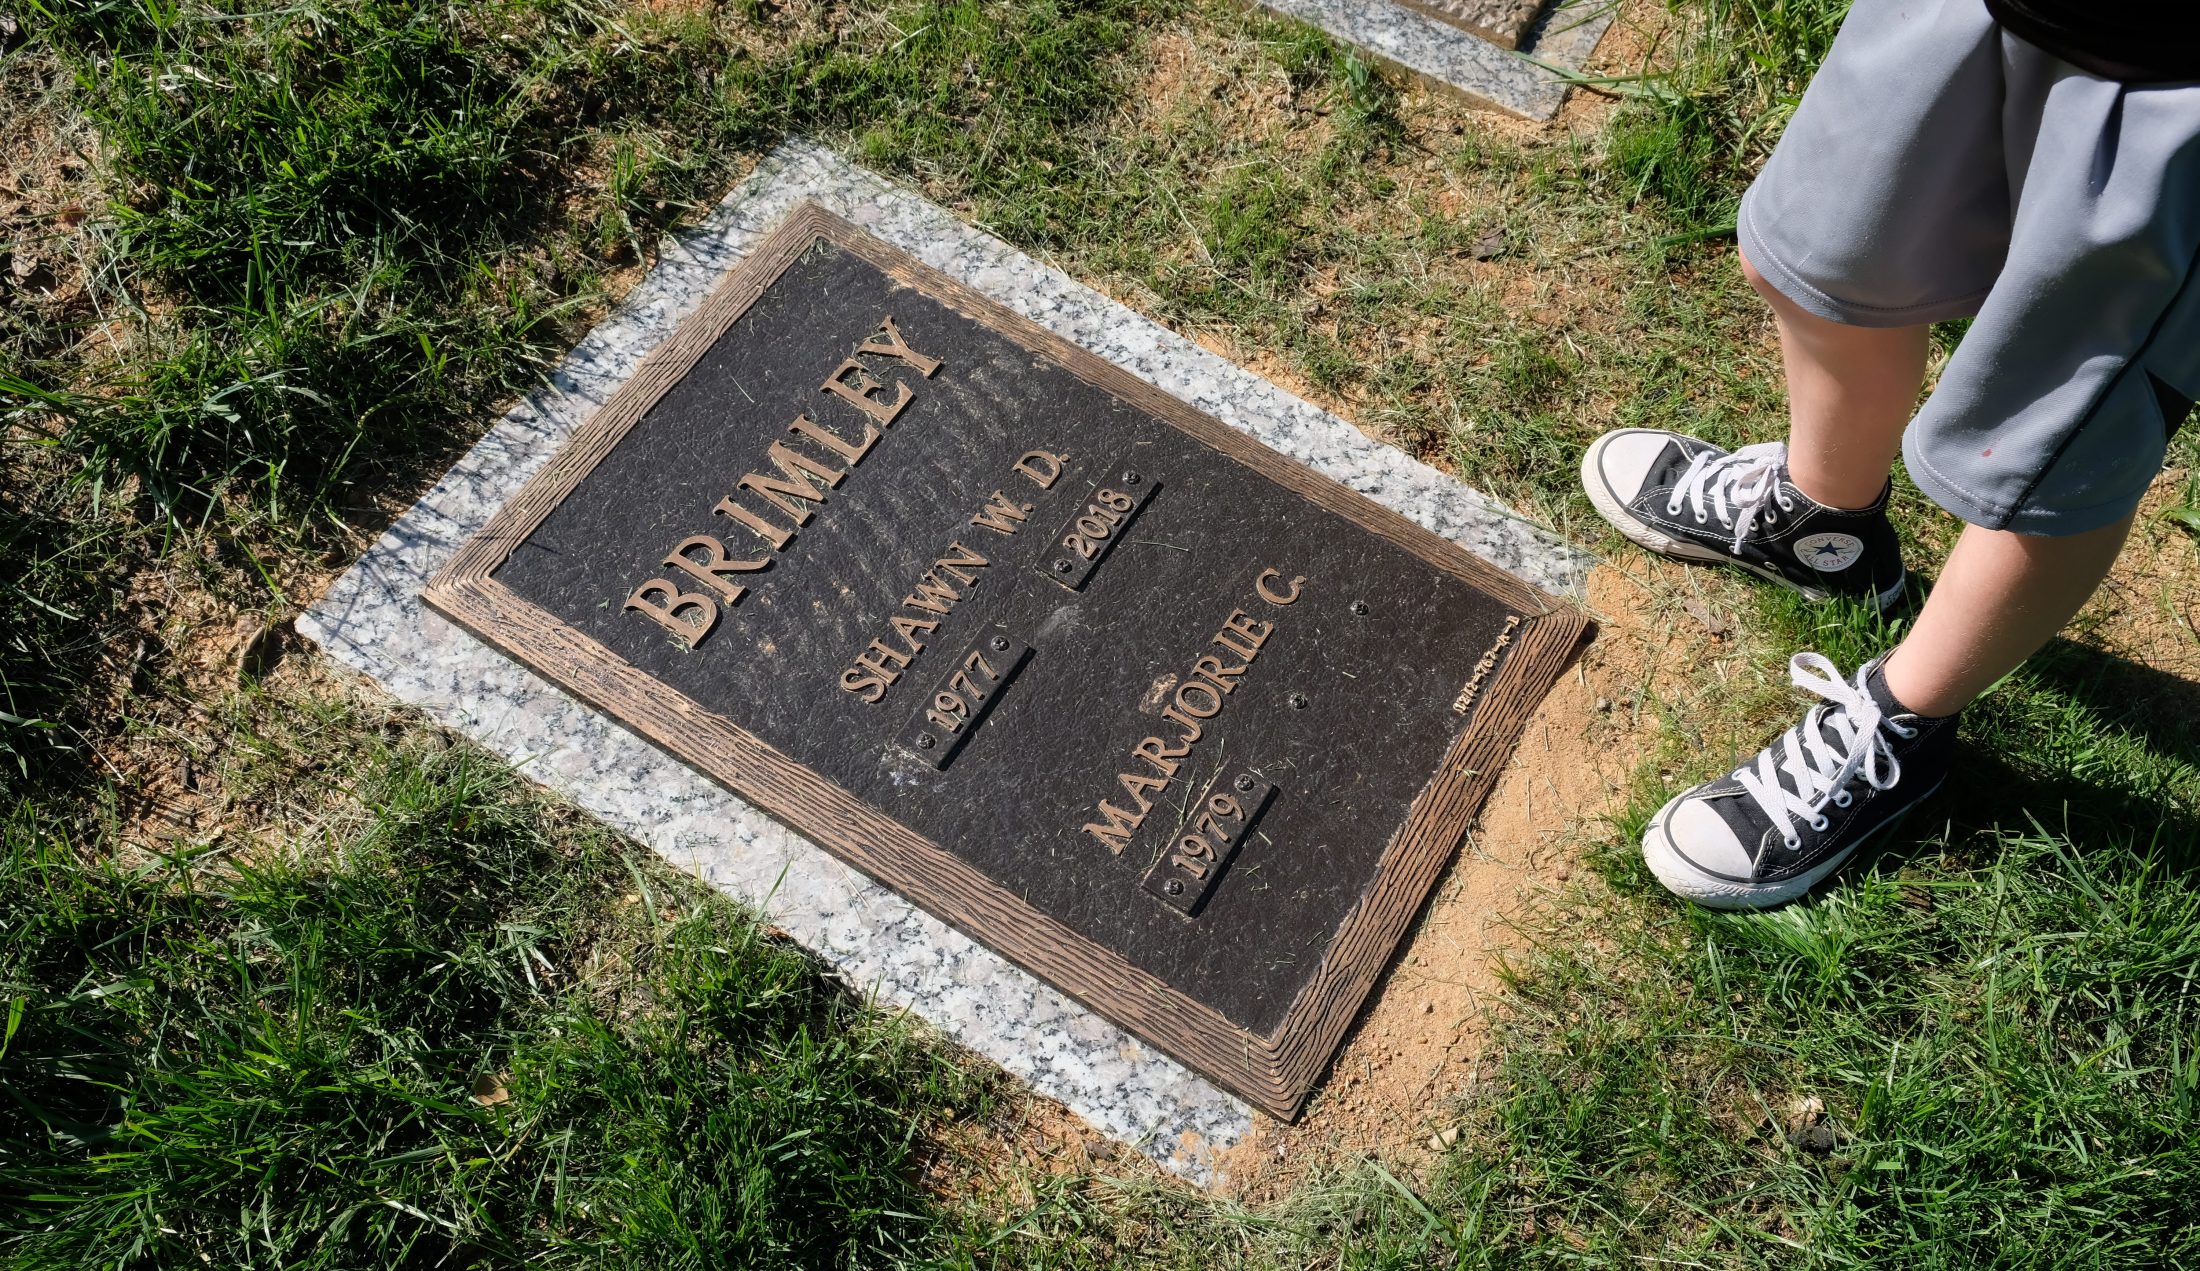 Shawn Brimley's grave with Austin's converse and Marjorie's name appearing as a widow